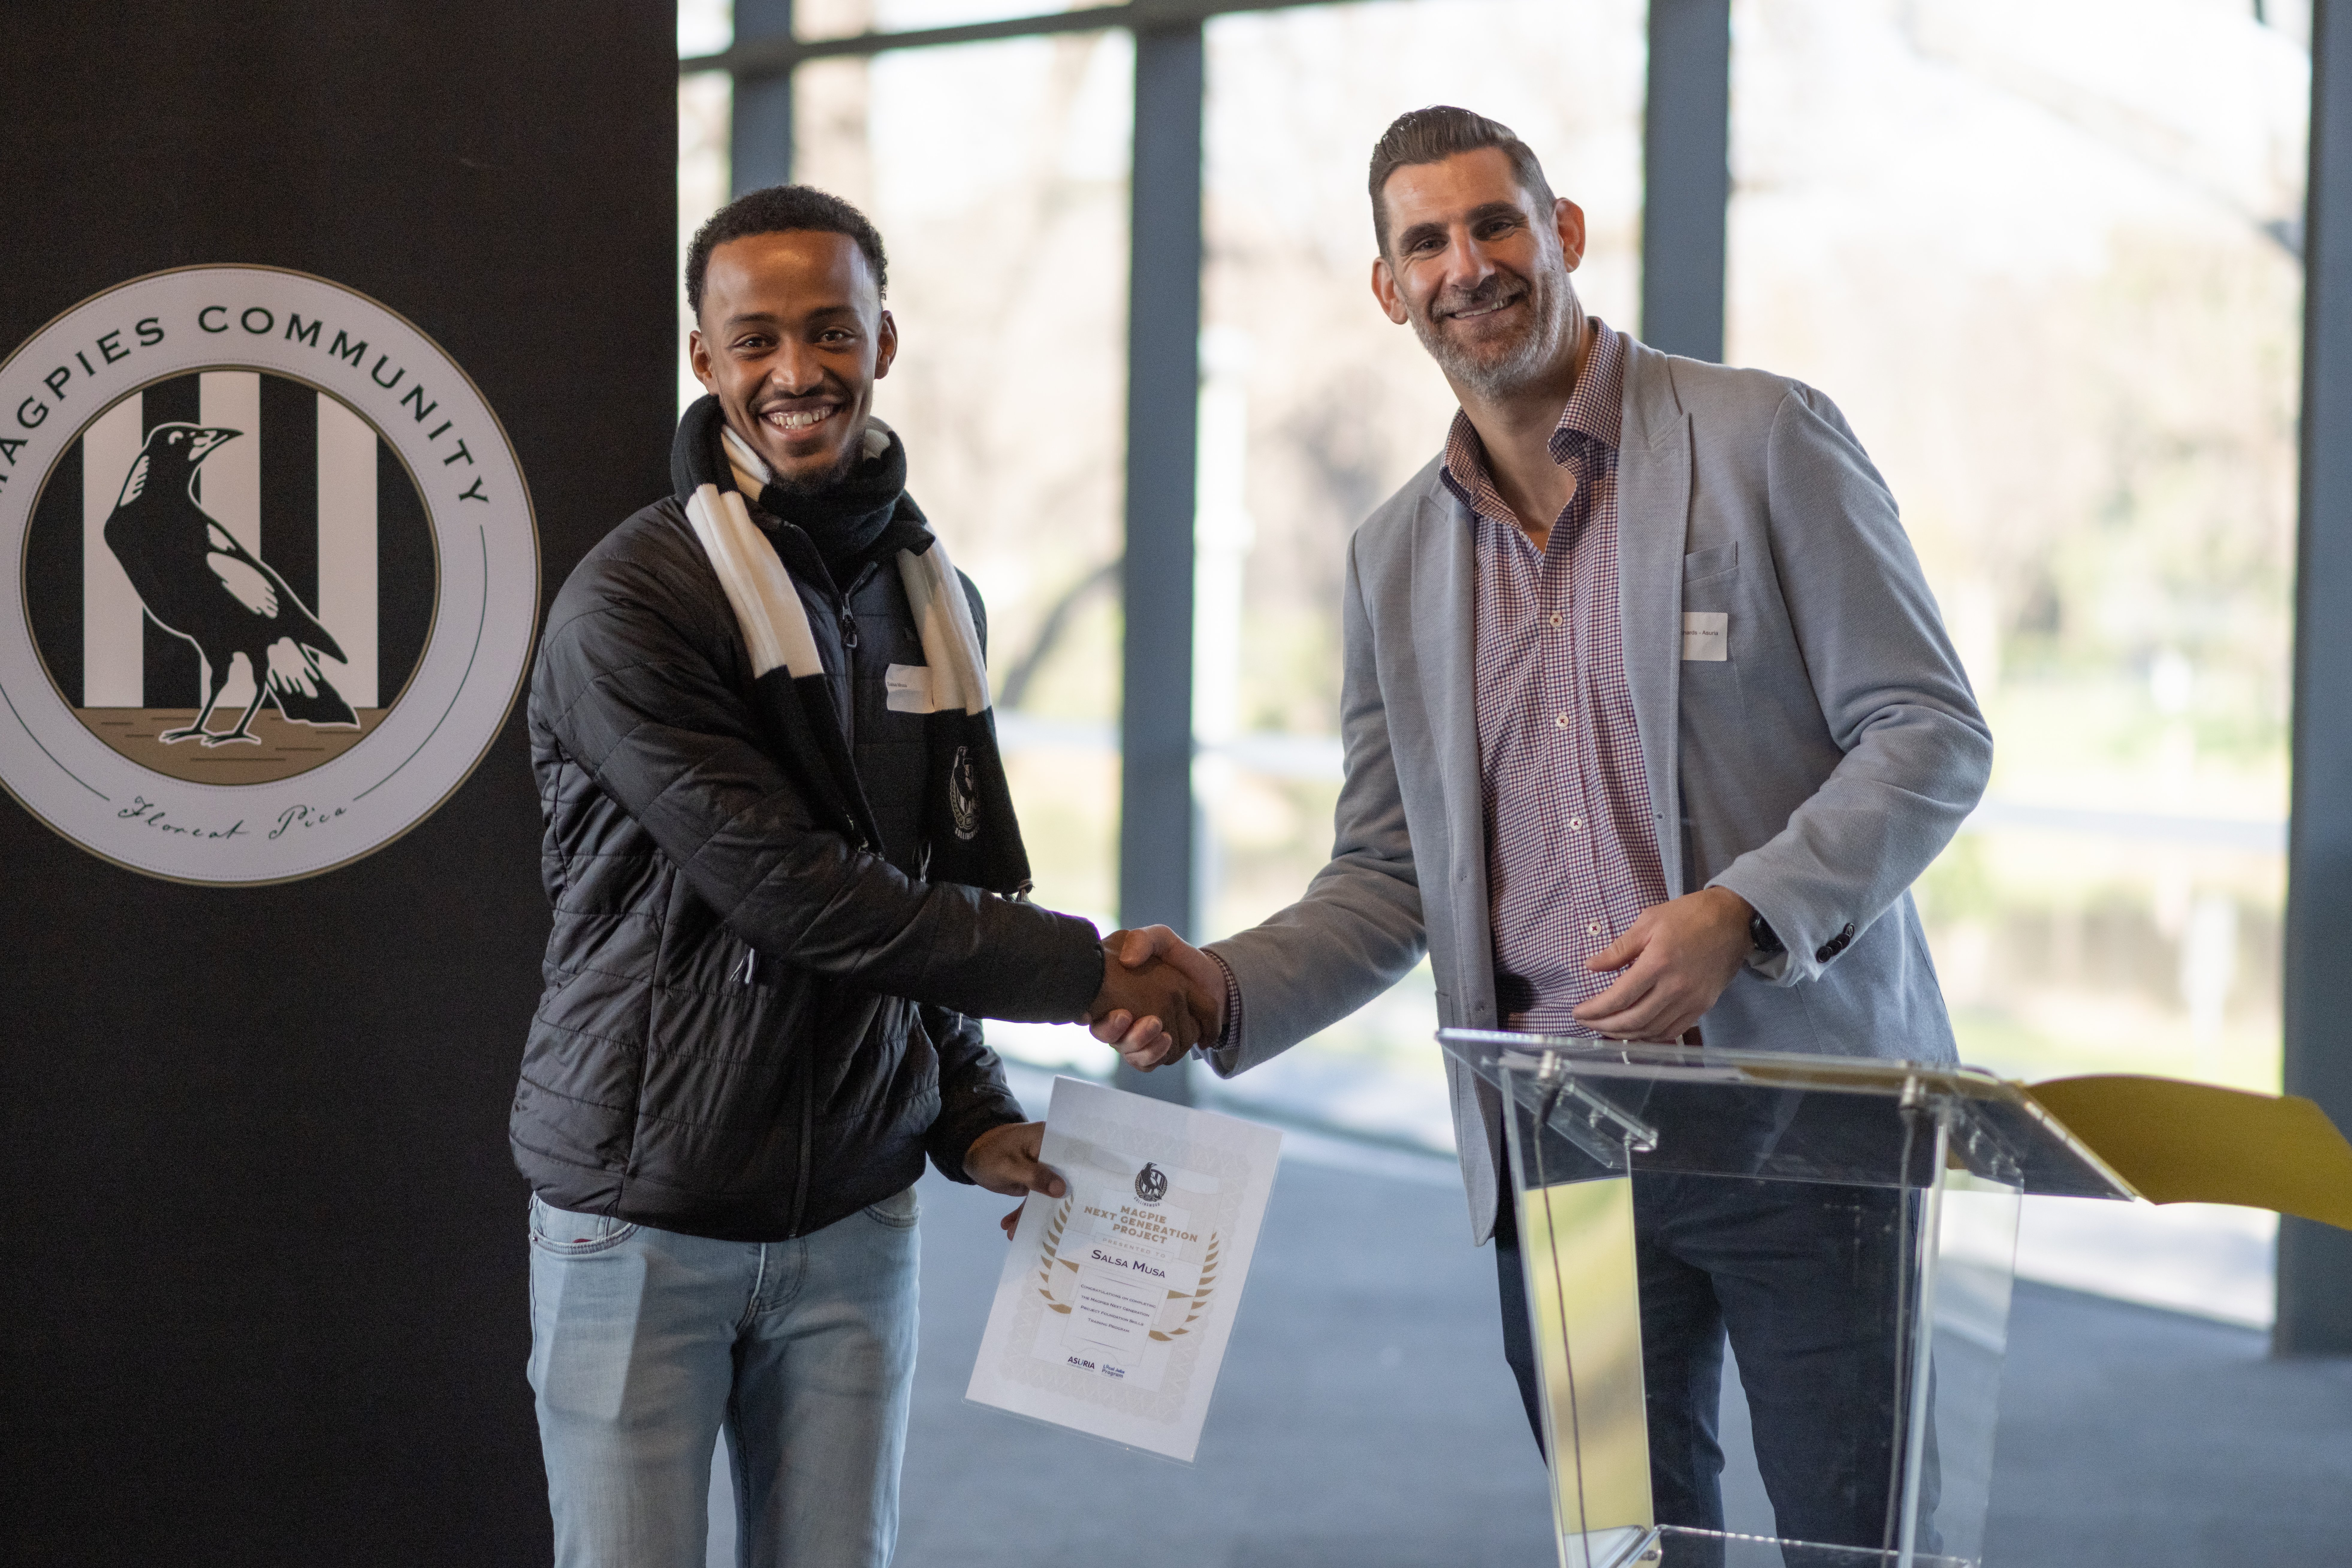 Magpie Next Generation Participant Salas receiving his certificate while shaking hands with Asuria JVES Project Manager Darren Richards